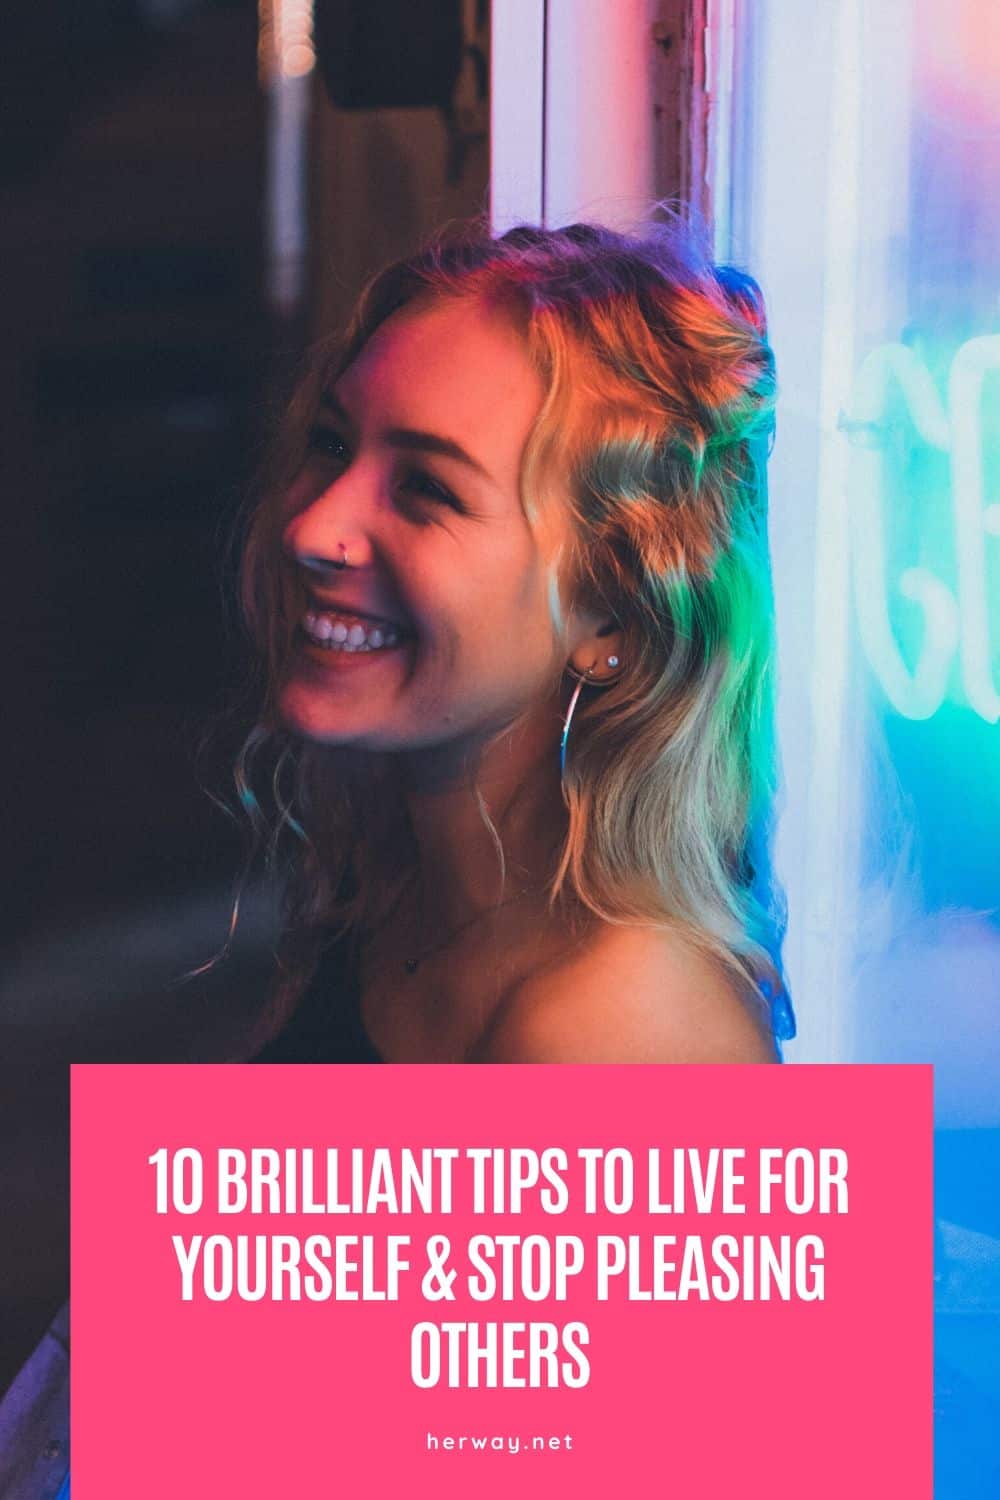 10 Brilliant Tips To Live For Yourself & Stop Pleasing Others